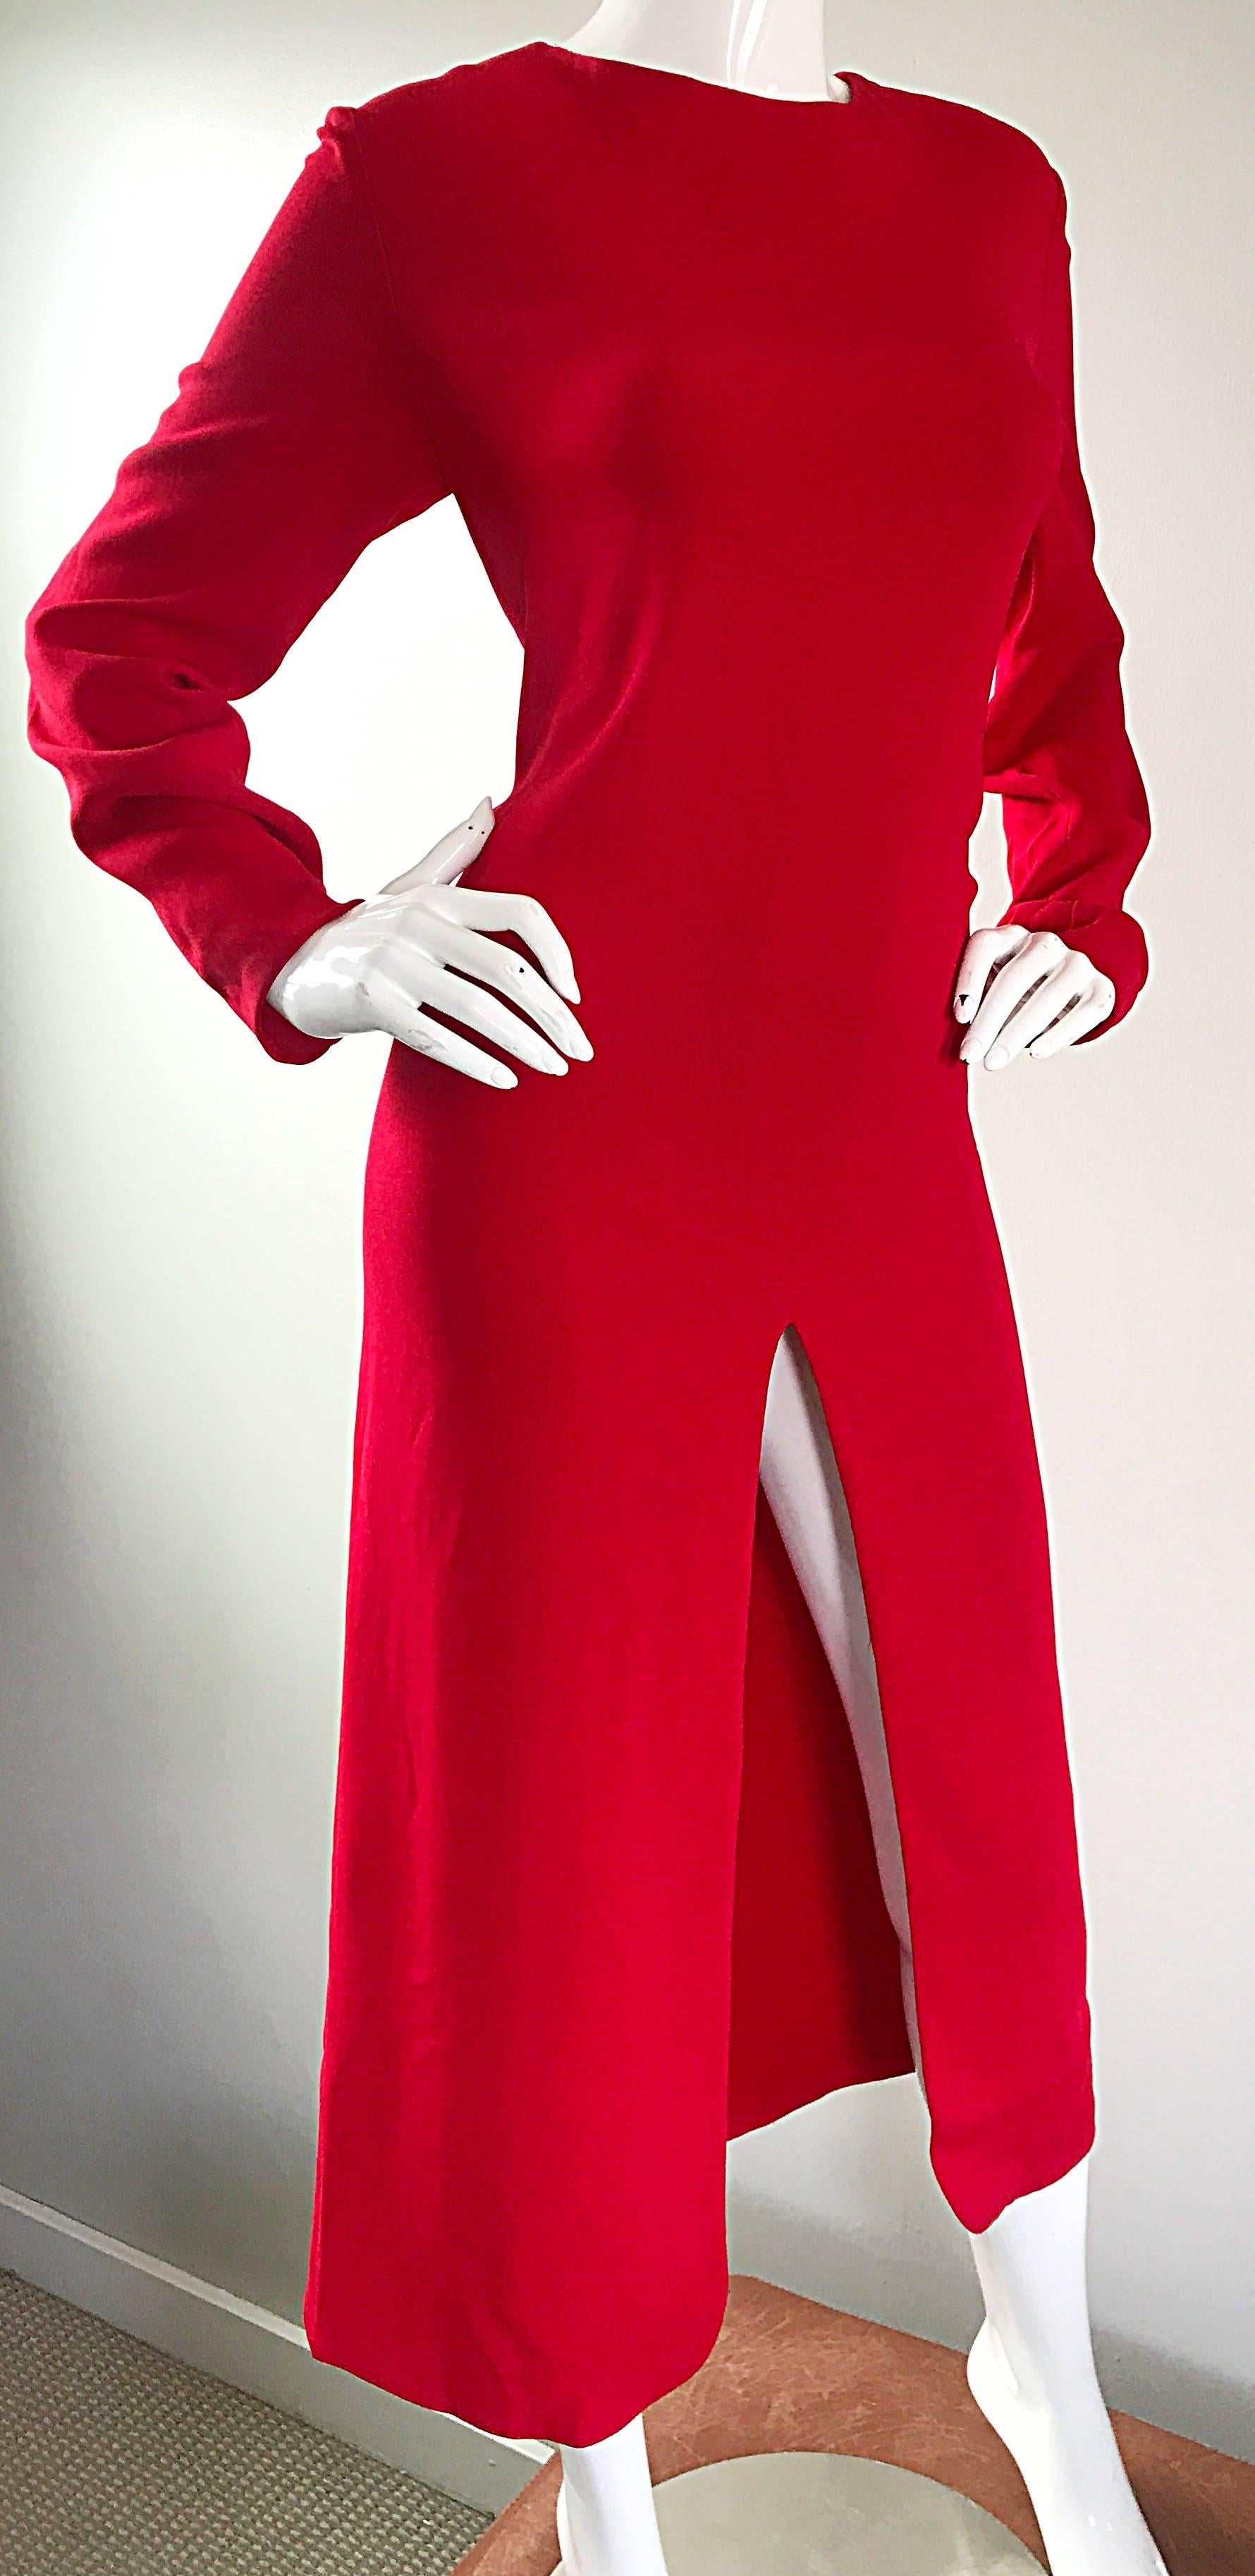 1990s Badgley Mischka Size 10 / 12 Lipstick Red Long Sleeve Evening Midi Dress In Excellent Condition For Sale In San Diego, CA